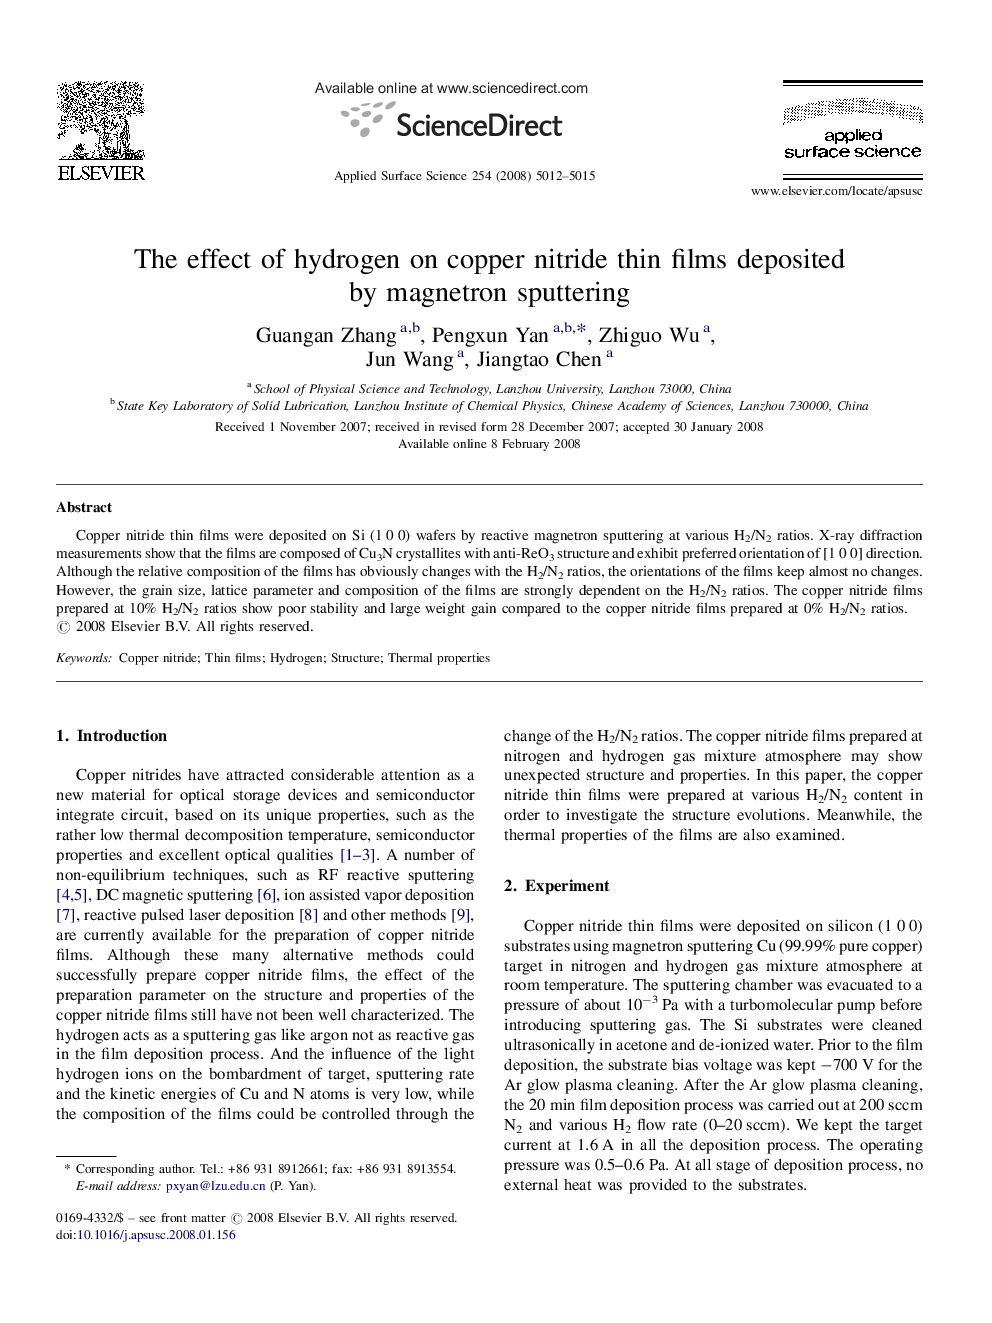 The effect of hydrogen on copper nitride thin films deposited by magnetron sputtering